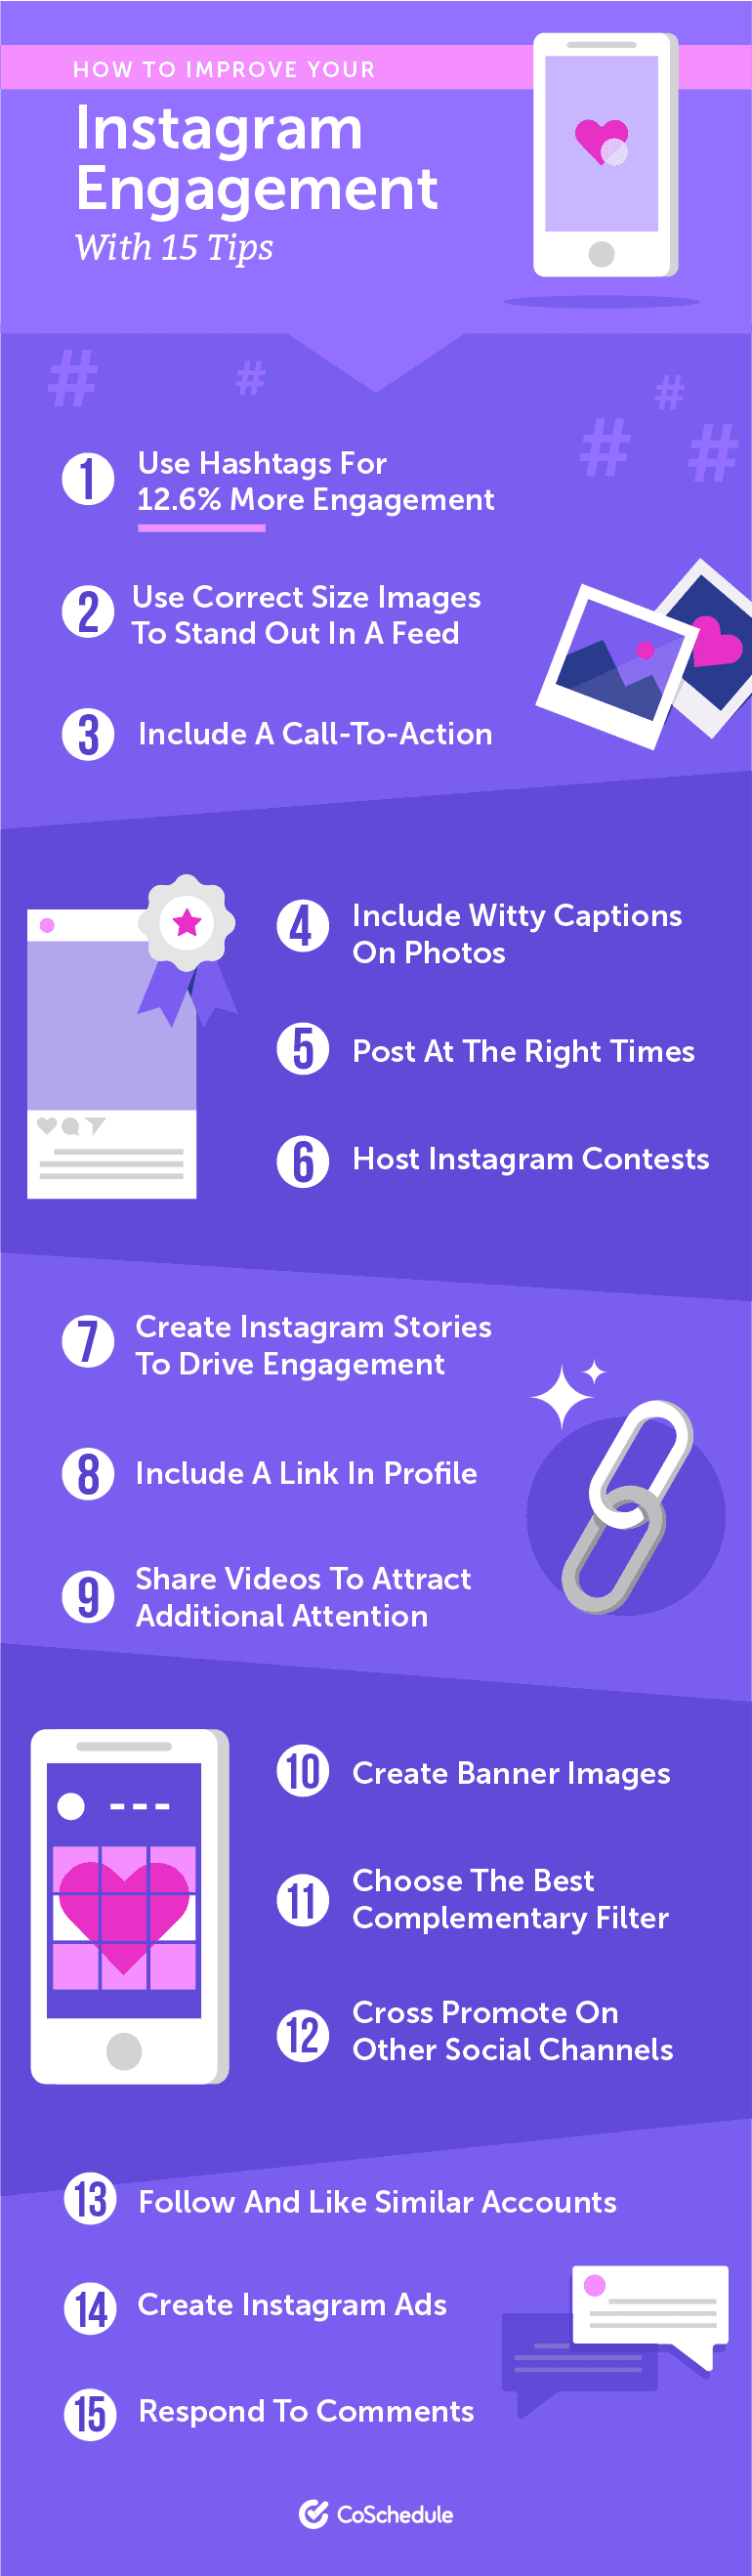 15 Ways to Improve Instagram Engagement: An Infographic